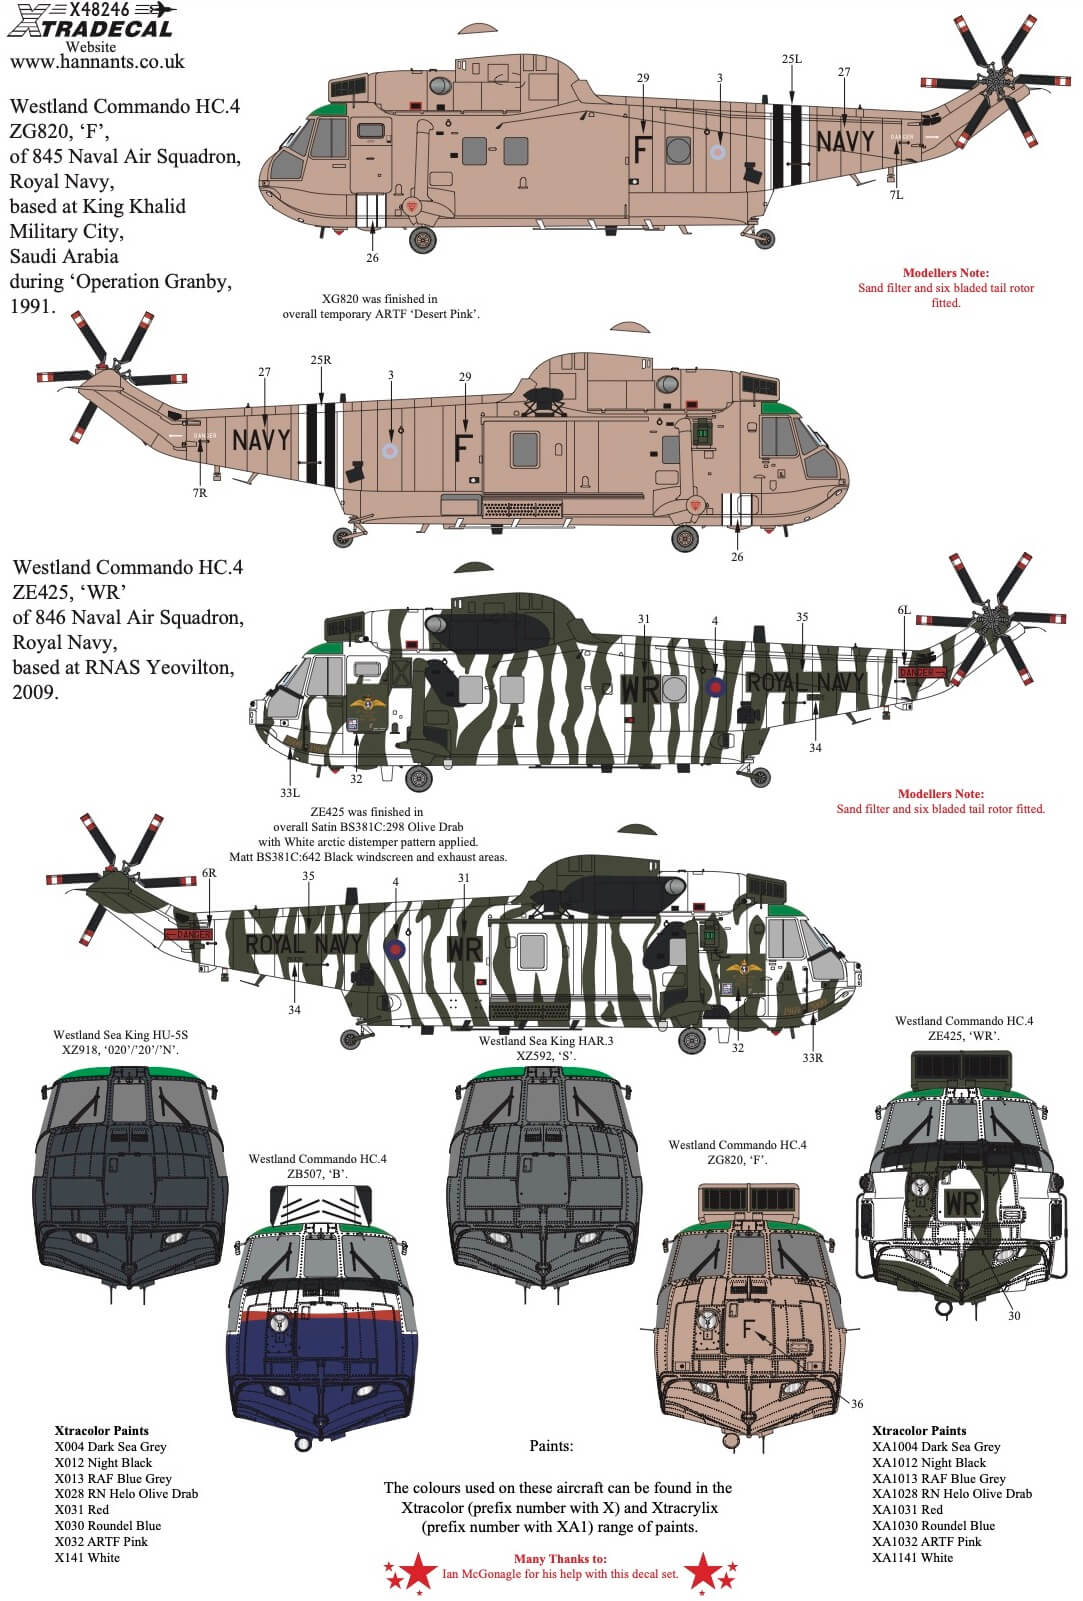 1:48 Westland Sea King Collection Pt4 X48246 Xtradecal